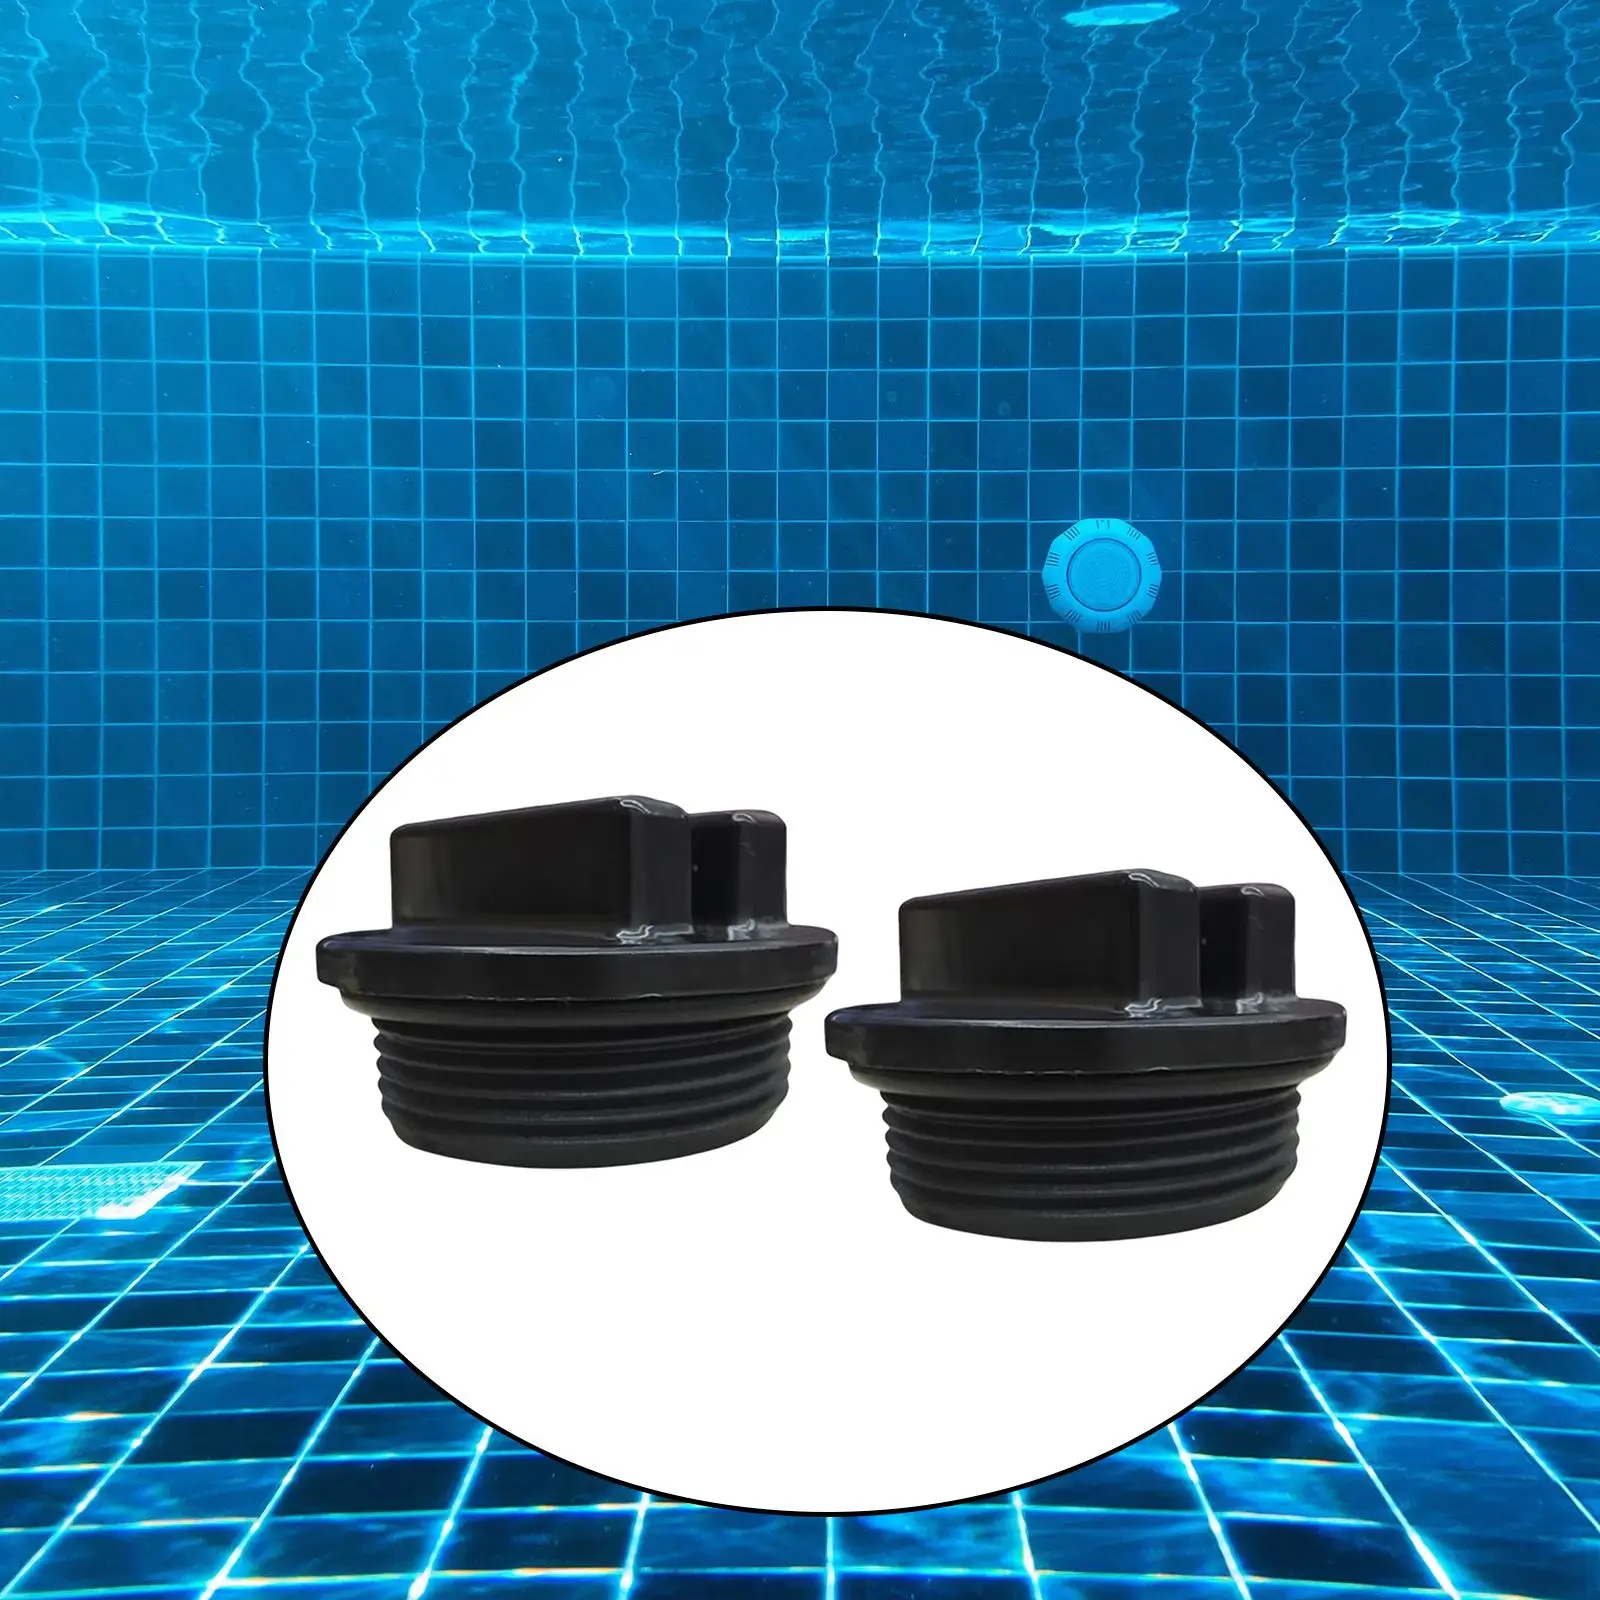 2Pcs Threaded Pool Filter Drains Replacement Parts Drain Cover Outlet Plugs 1.5